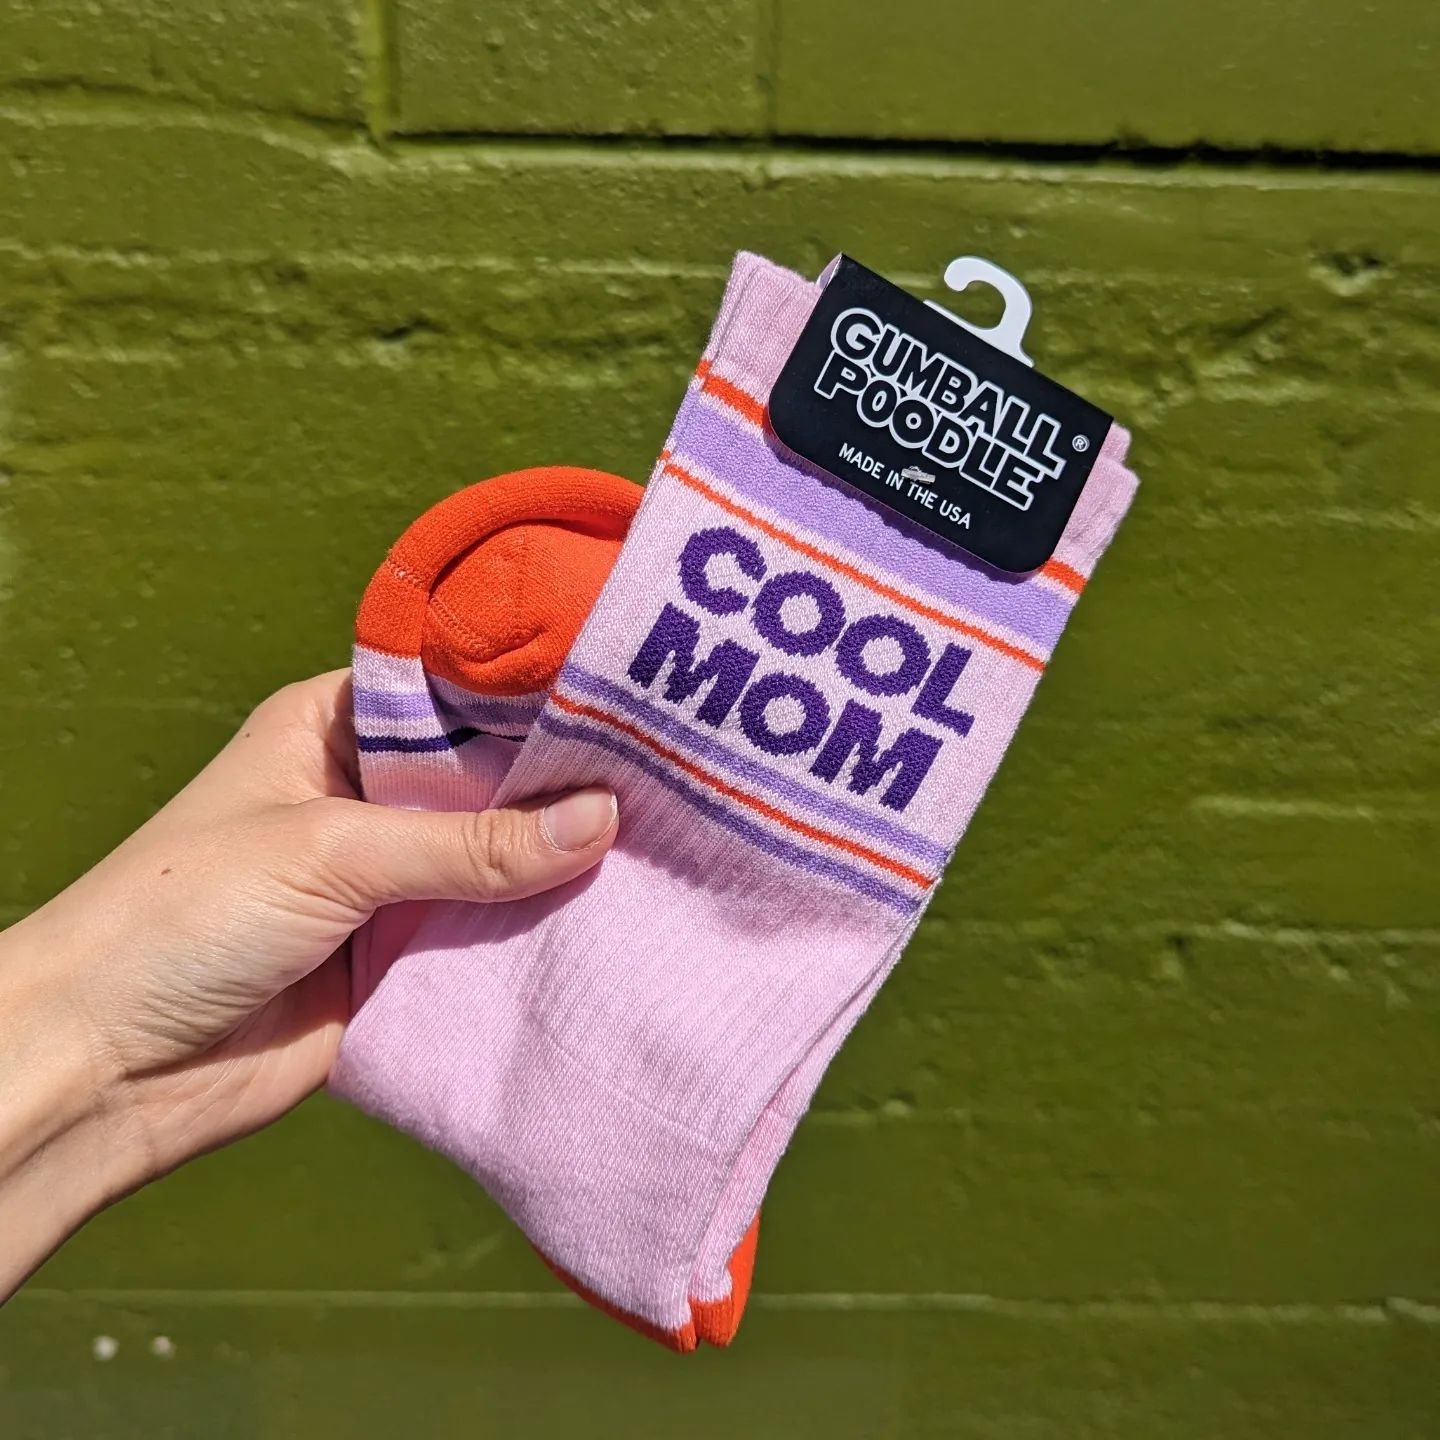 Some current favourite socks from @gumballpoodle 💓🧦 
Sizes are unisex one size fits most
+ Many more designs available in store :)

#shoplocal
#shopsmall&nbsp;
#consignment
#downtownkelowna